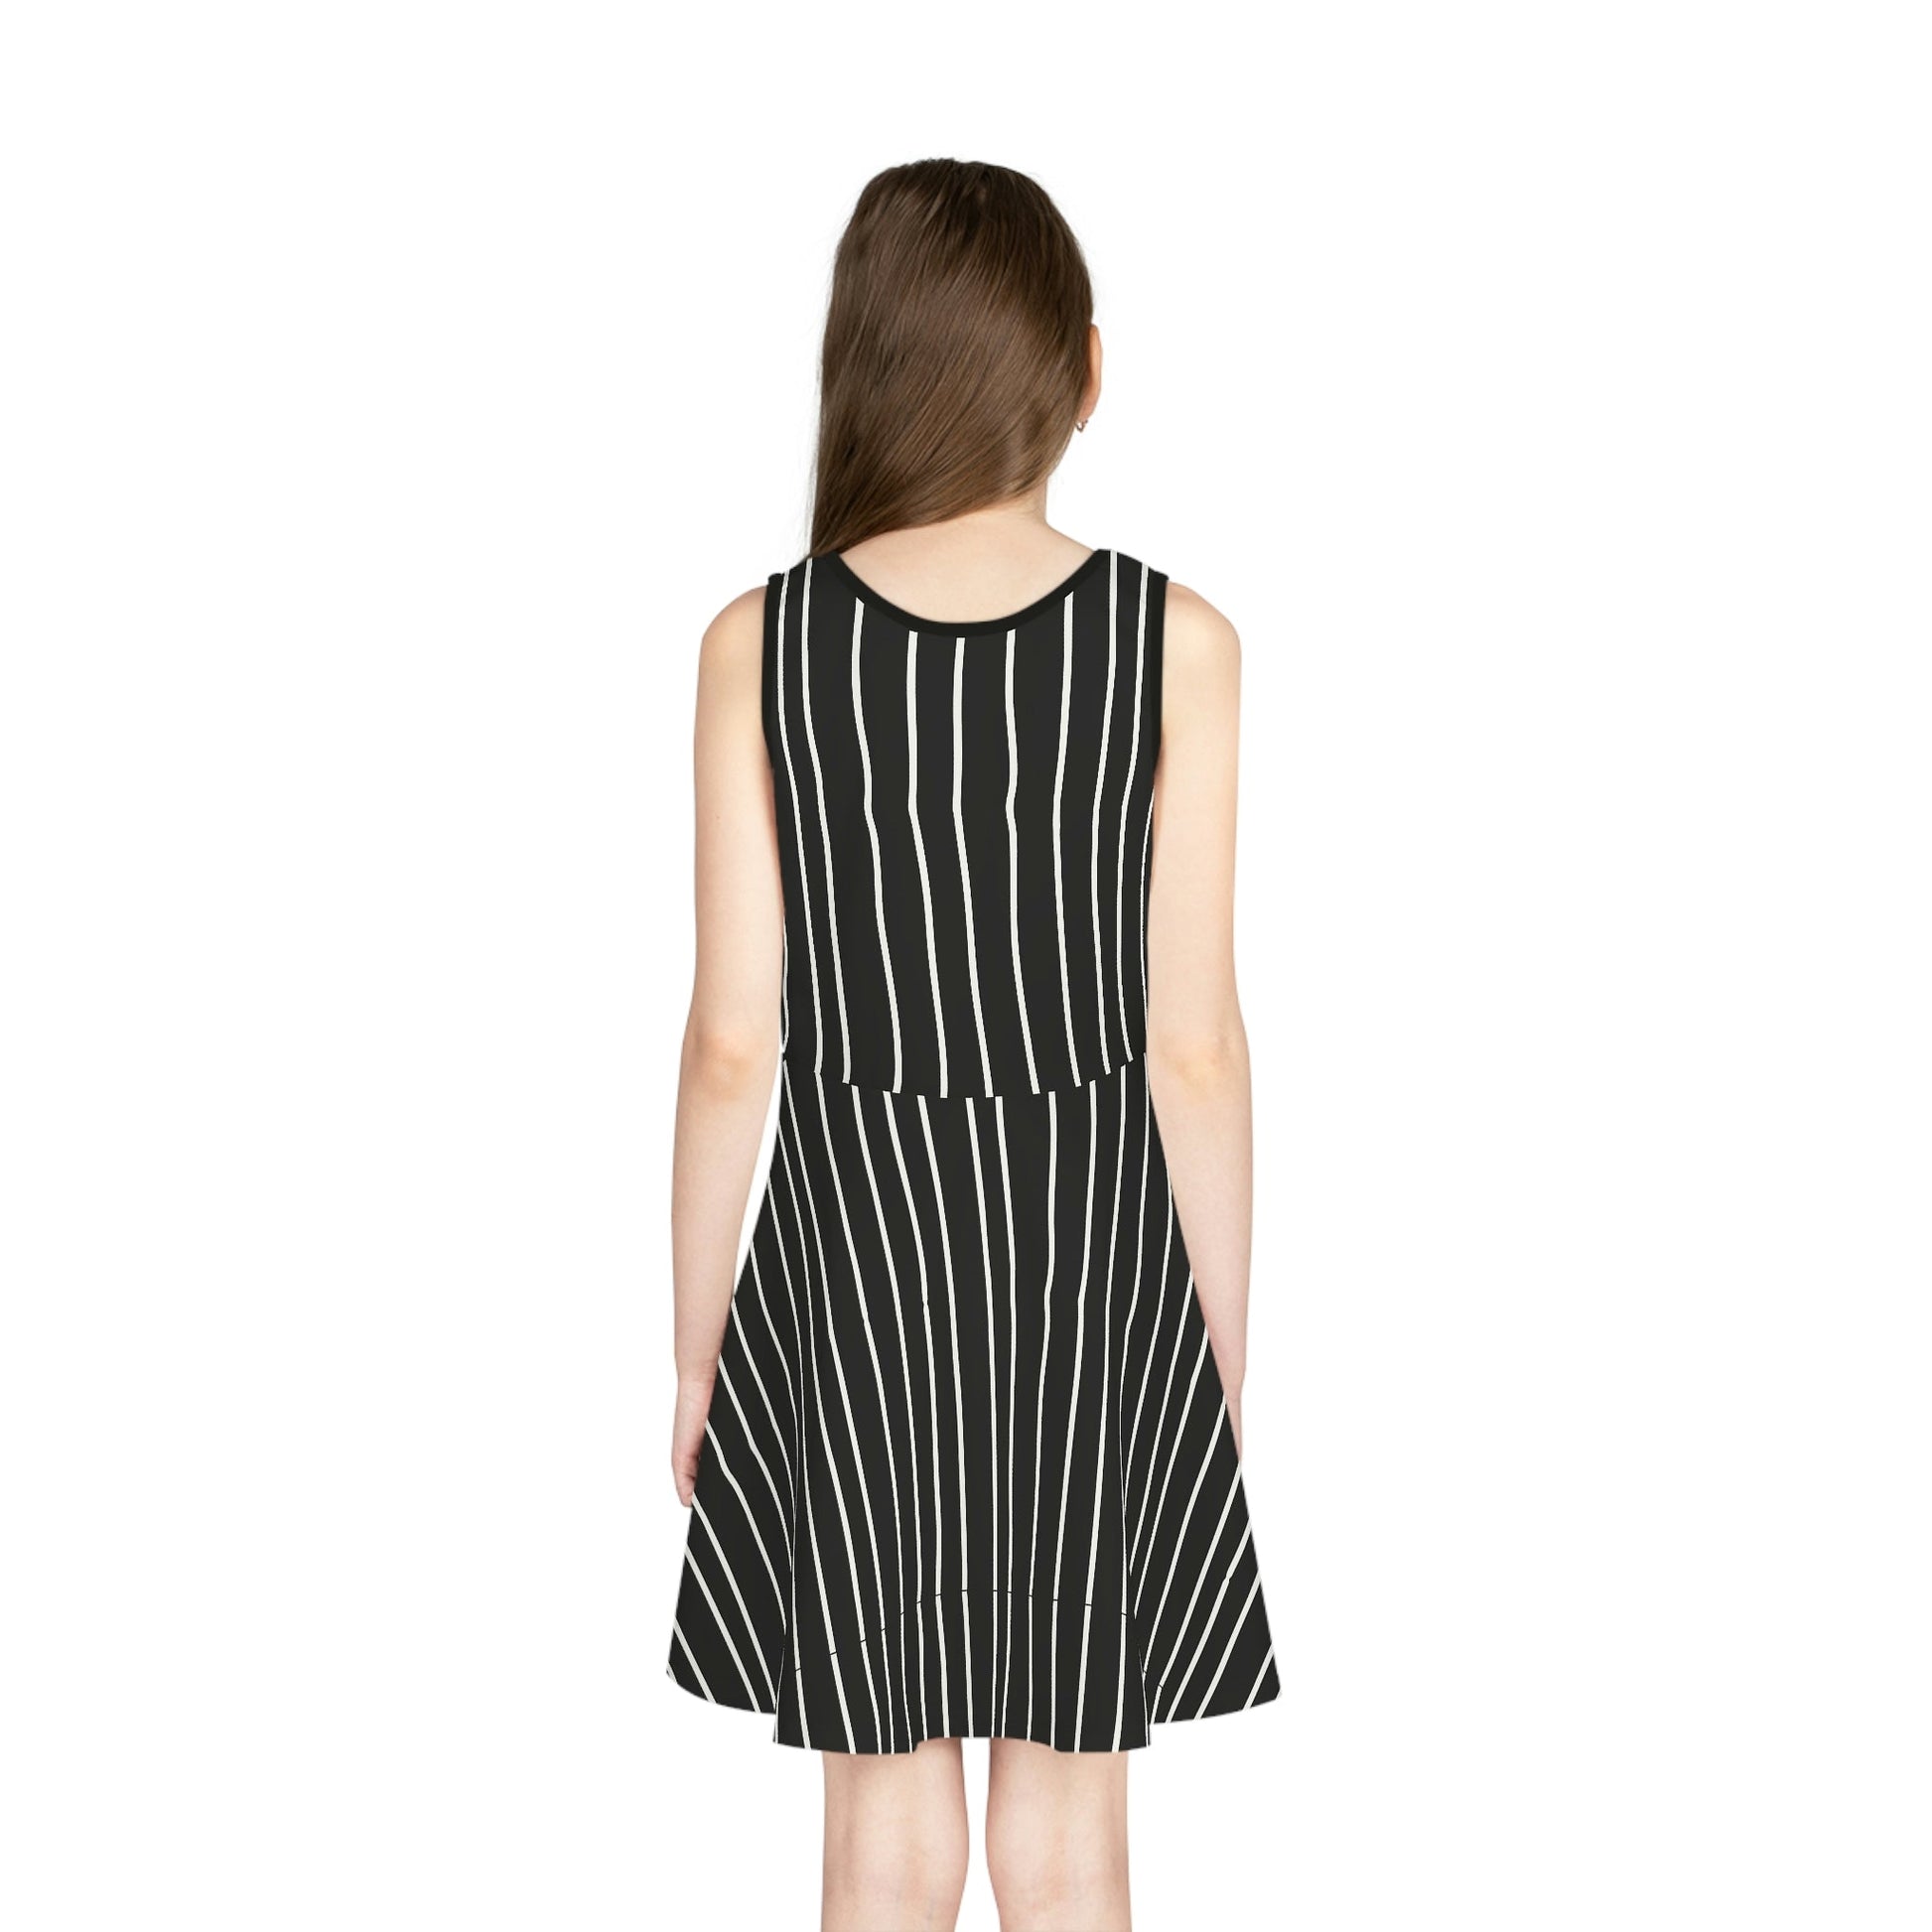 Bone Daddy Girls' Sleeveless Sundress (AOP) All Over PrintAOPAOP Clothing#tag4##tag5##tag6#